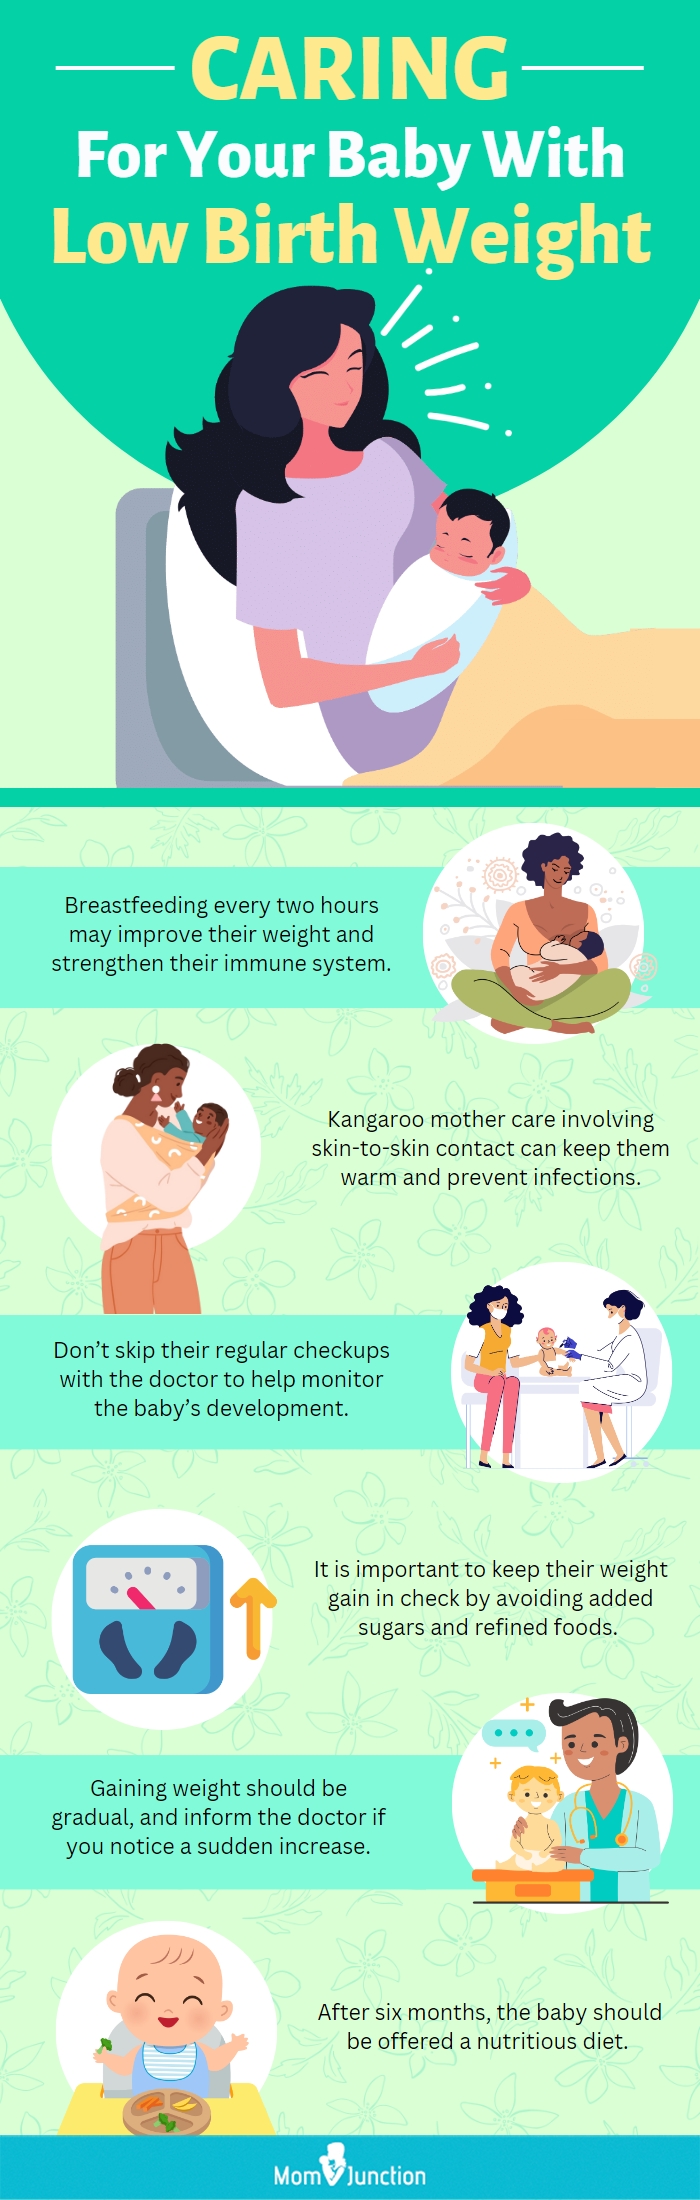 https://www.momjunction.com/wp-content/uploads/2023/01/Caring-For-Your-Baby-With-Low-Birth-Weight.jpg